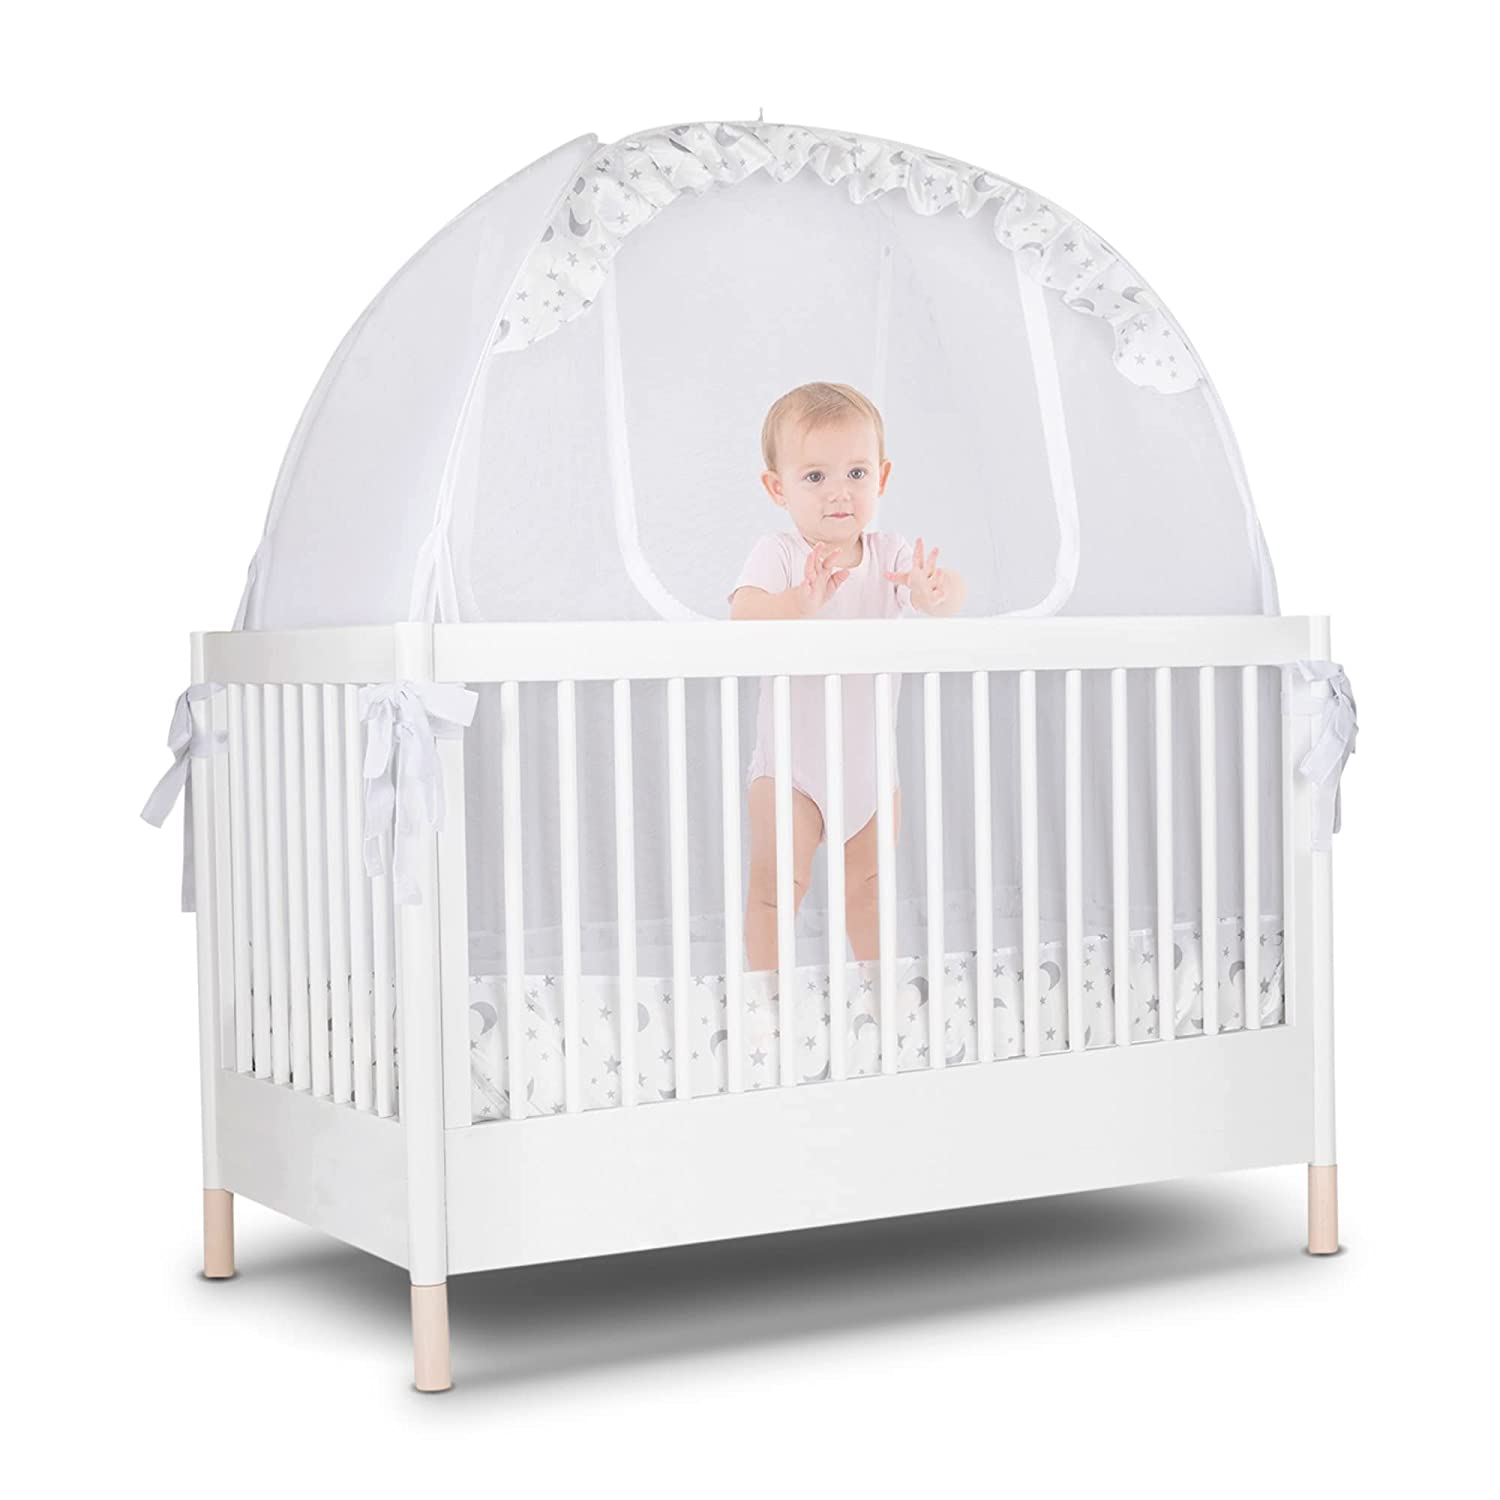 Baby Cots – Youngsters' Furniture and Bedroom Sets in Singapore